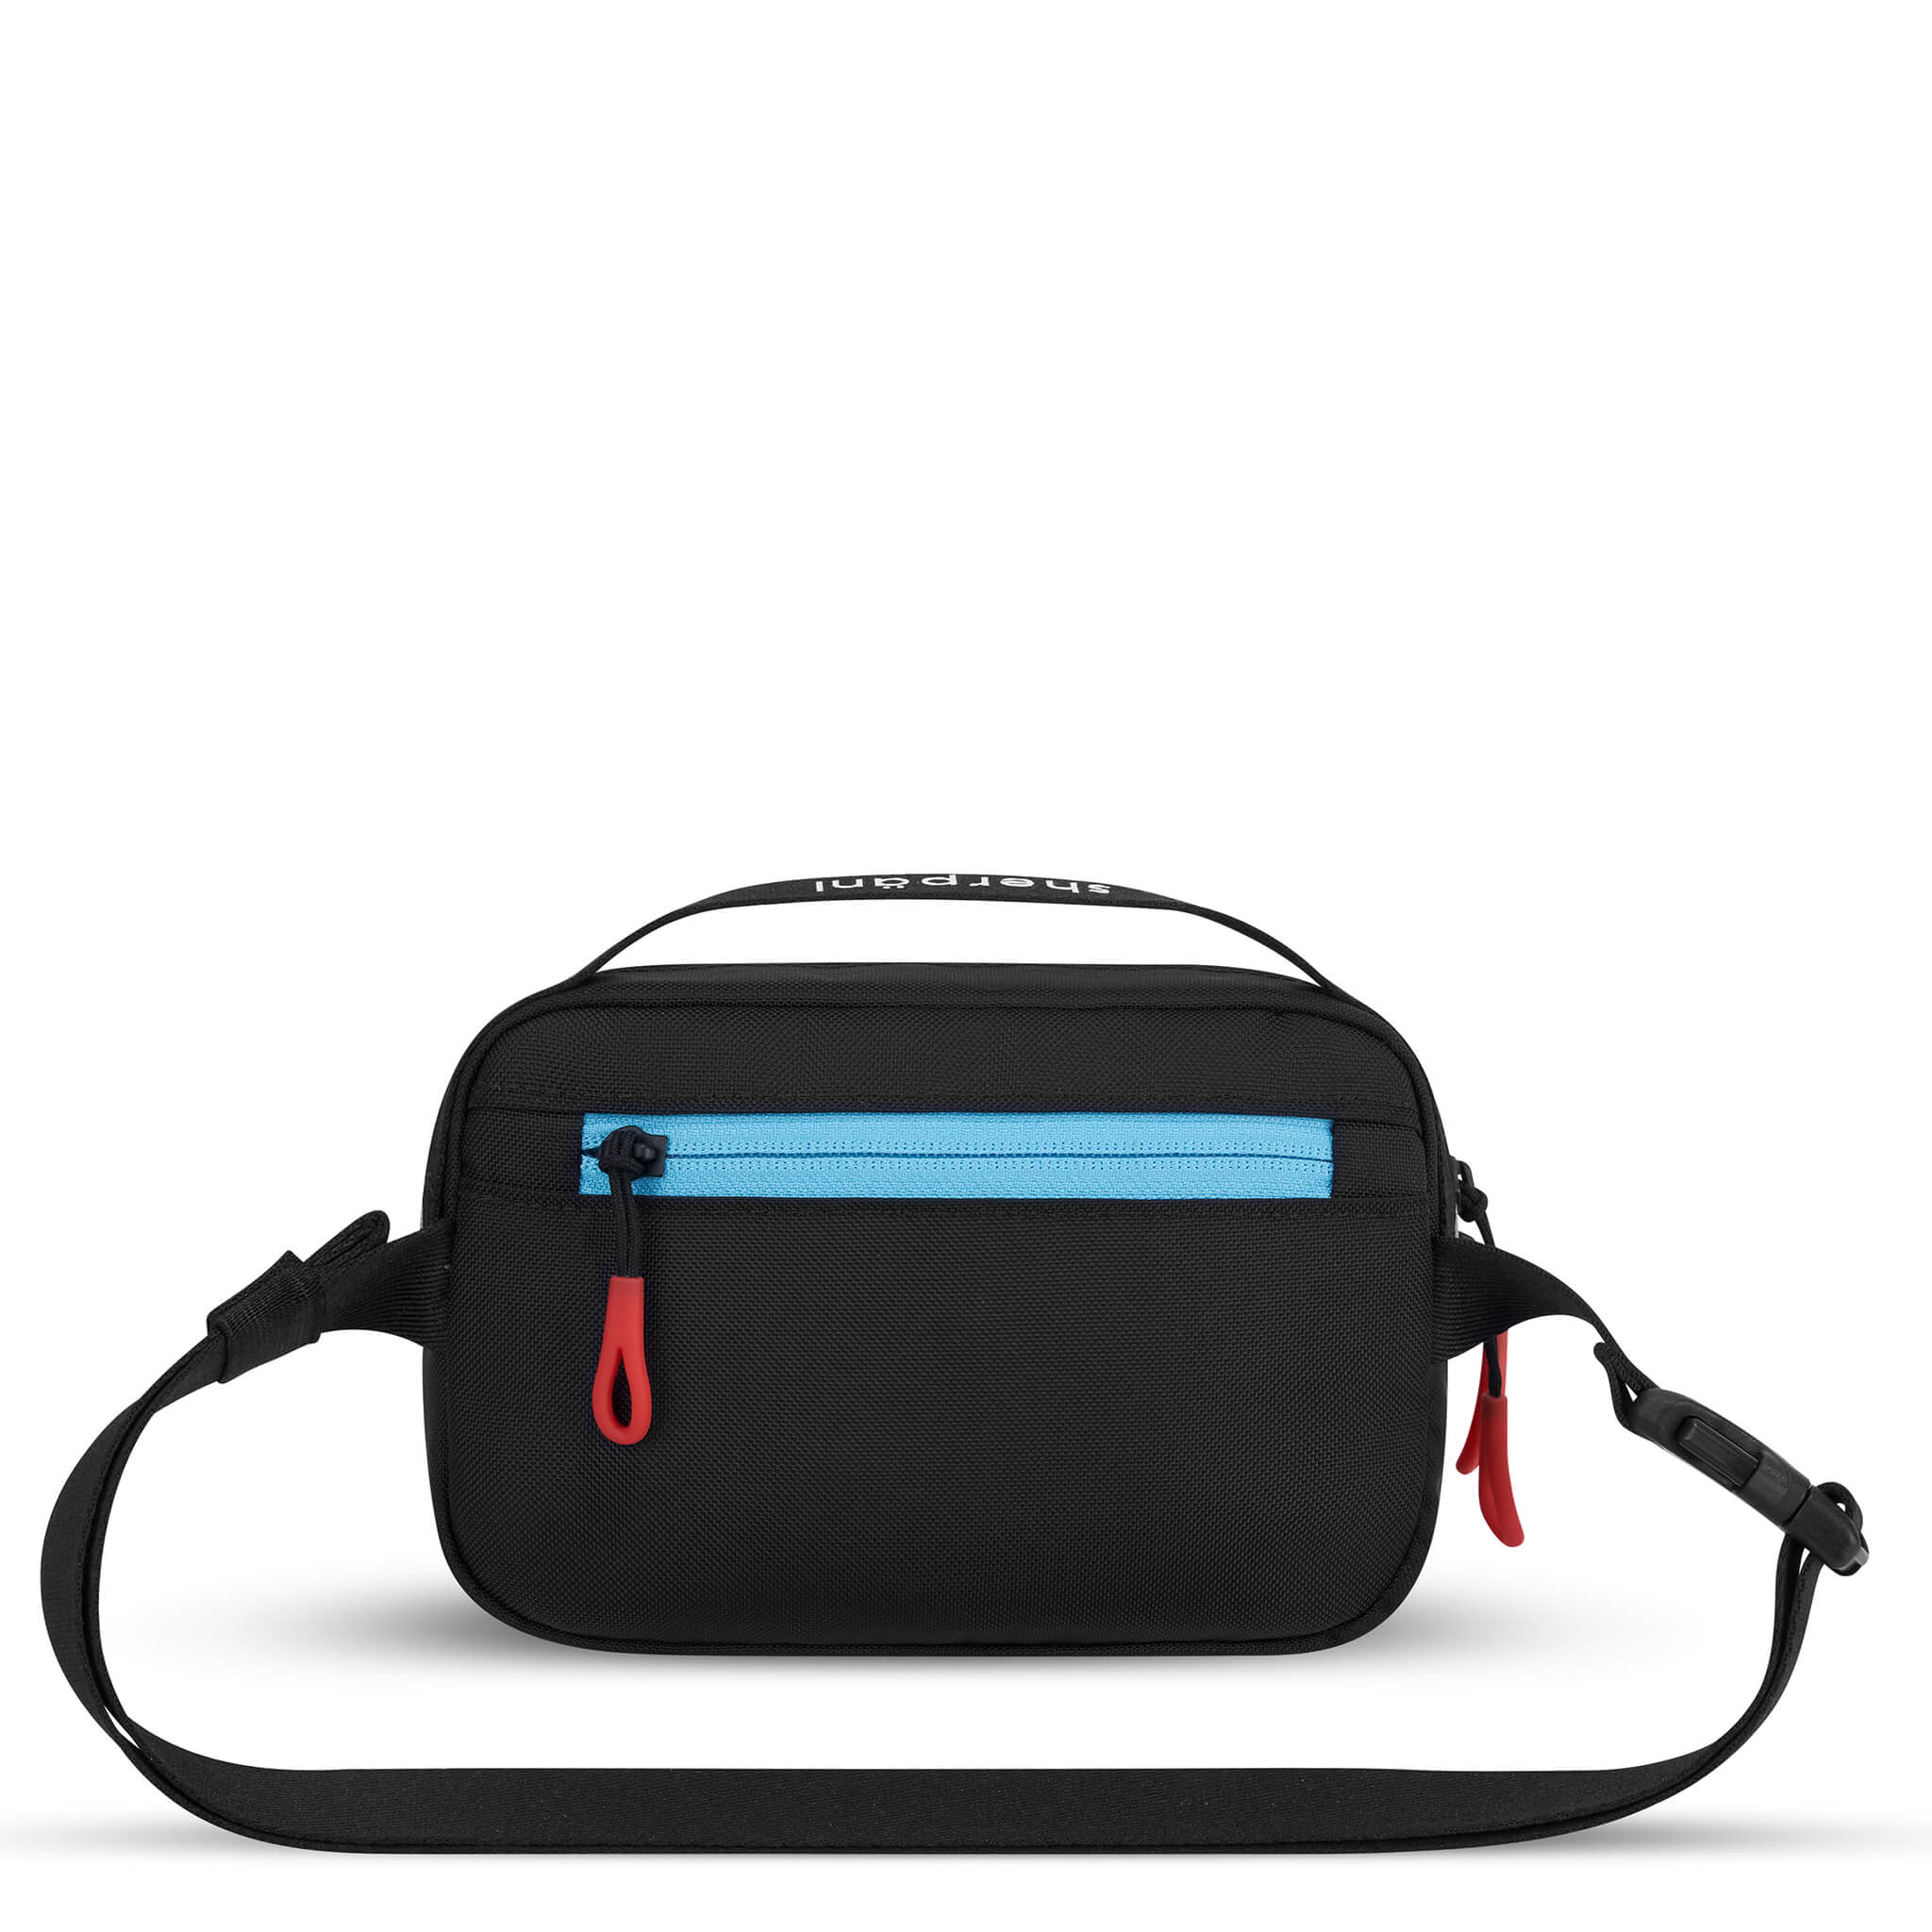 Back view of Sherpani&#39;s fanny pack, the Hyk in Chromatic. The back of the bag is black with a blue accent. Easy-pull zippers are accented in red. The fanny pack features an adjustable strap with a buckle.